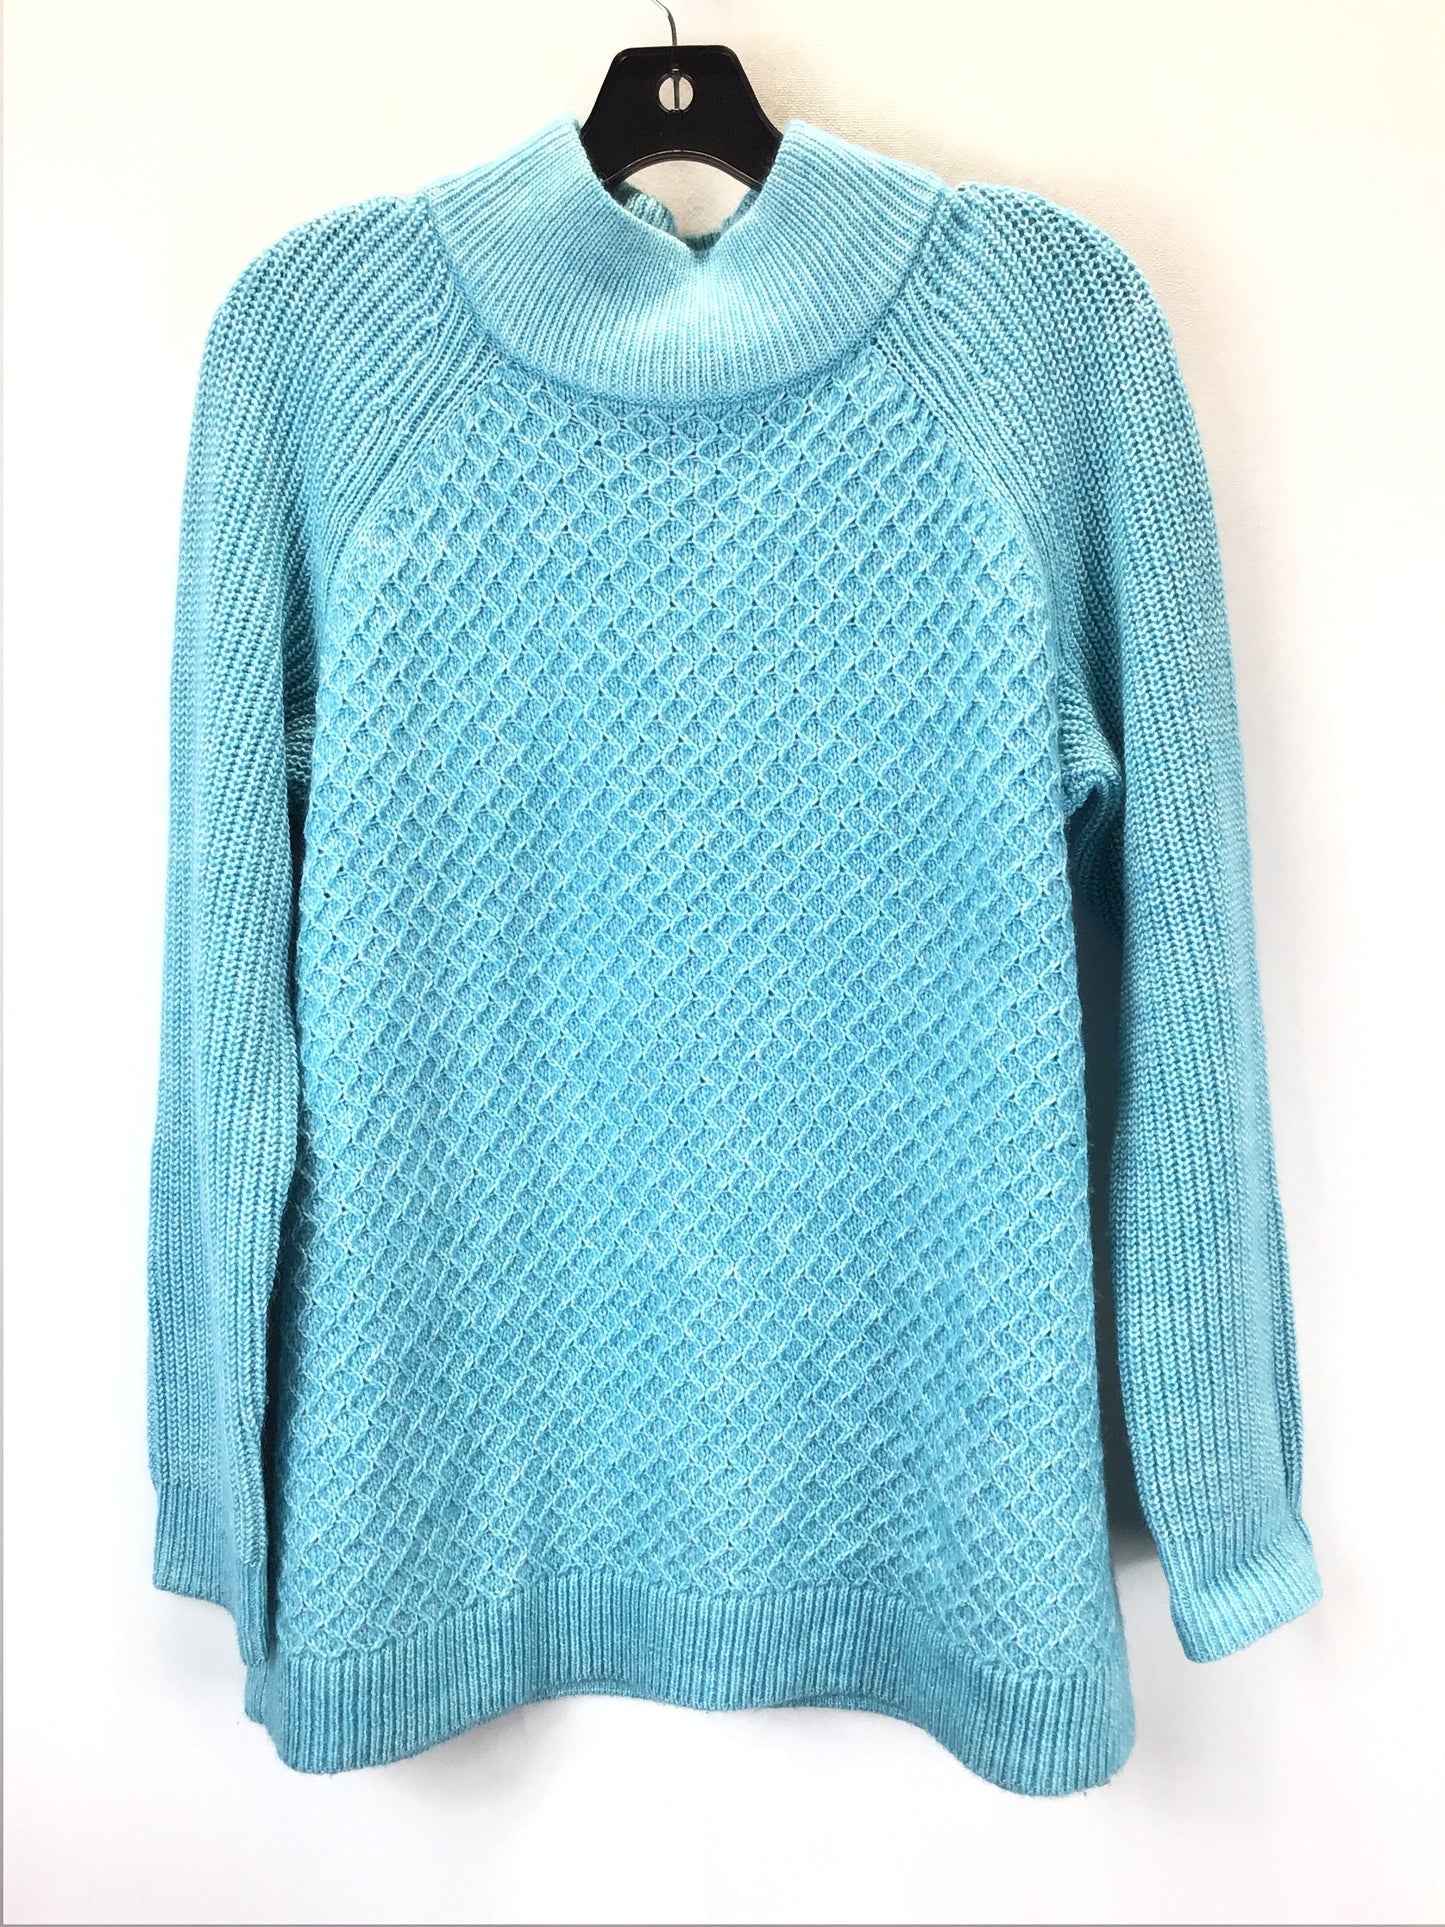 Sweater By Talbots  Size: 1x